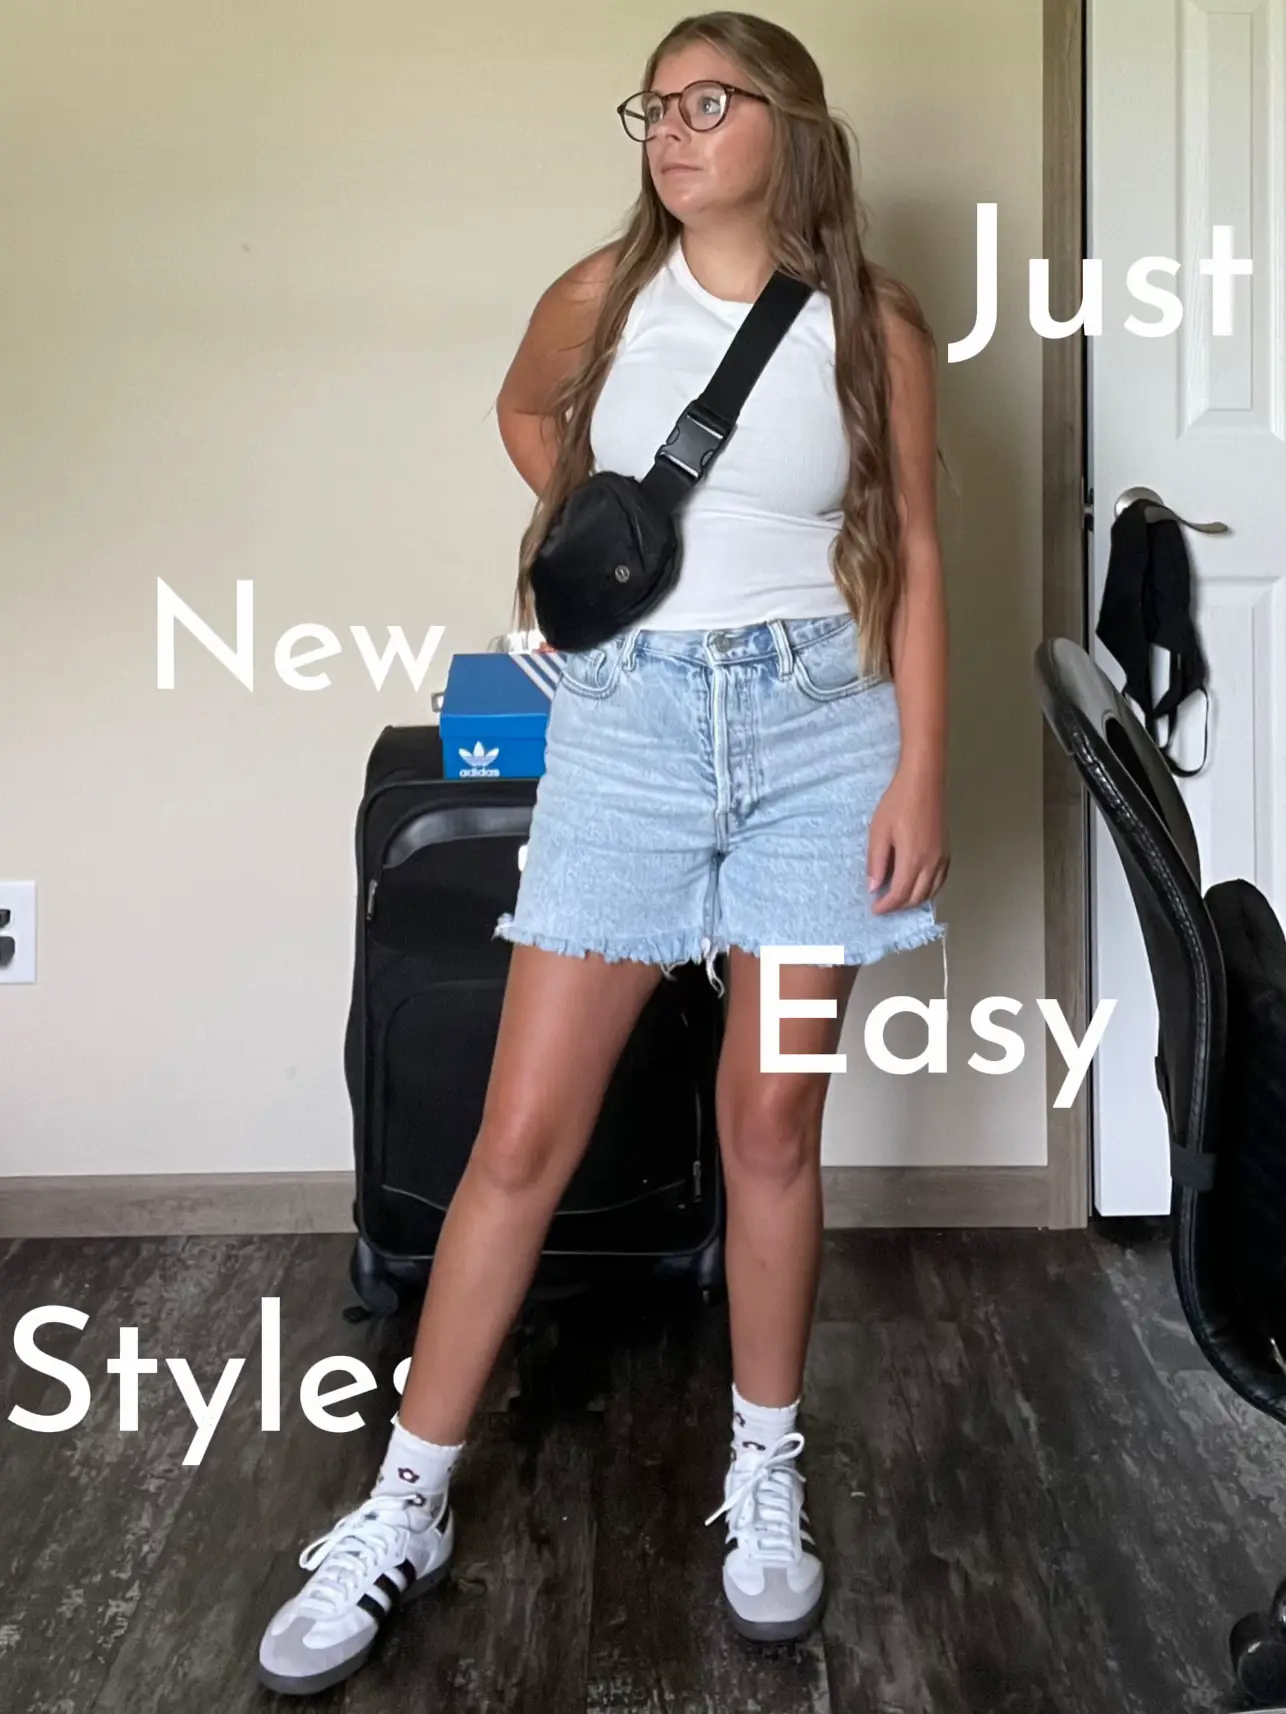 Brandy melville skylar eyes tank  Aesthetic clothes, Really cute outfits,  Dream clothes